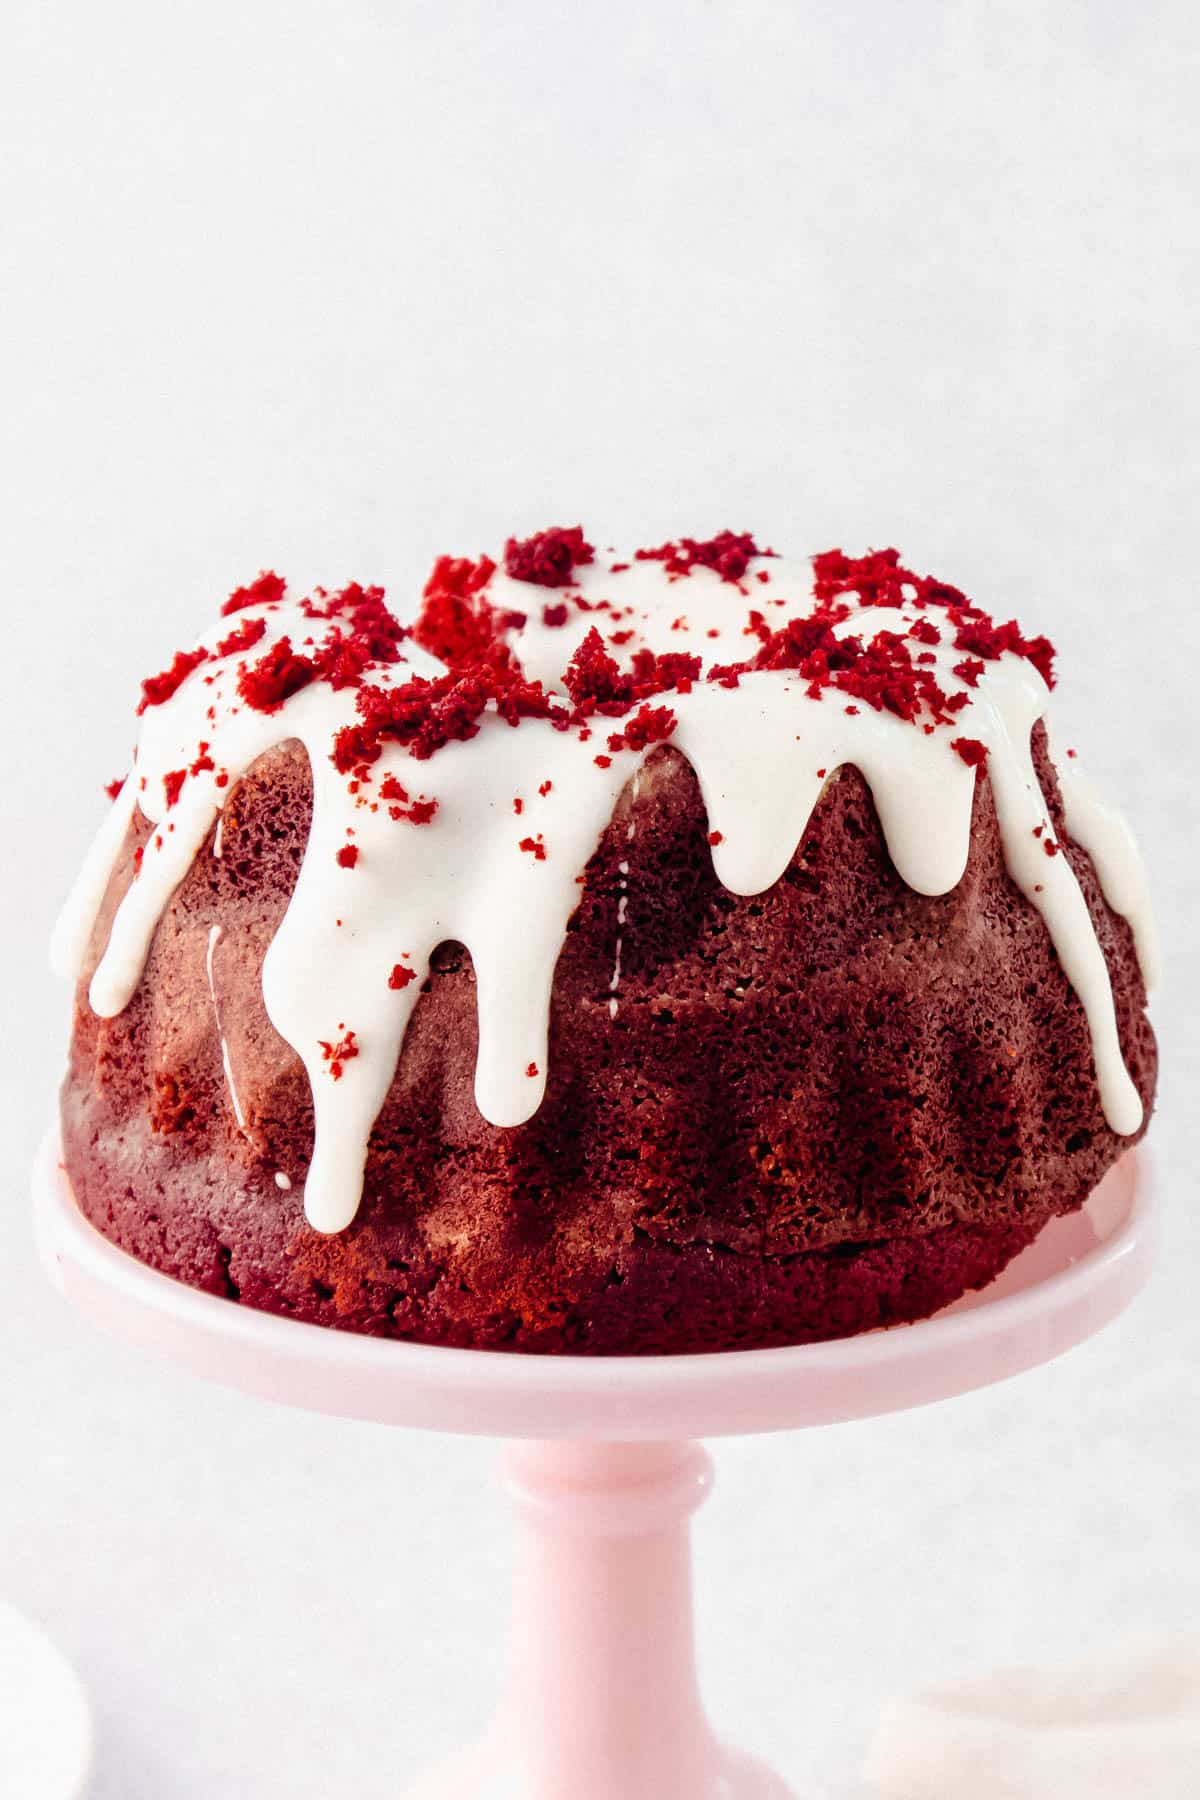 Red Velvet bundt cake covered in cream cheese glaze and sprinkled with cake crumbs